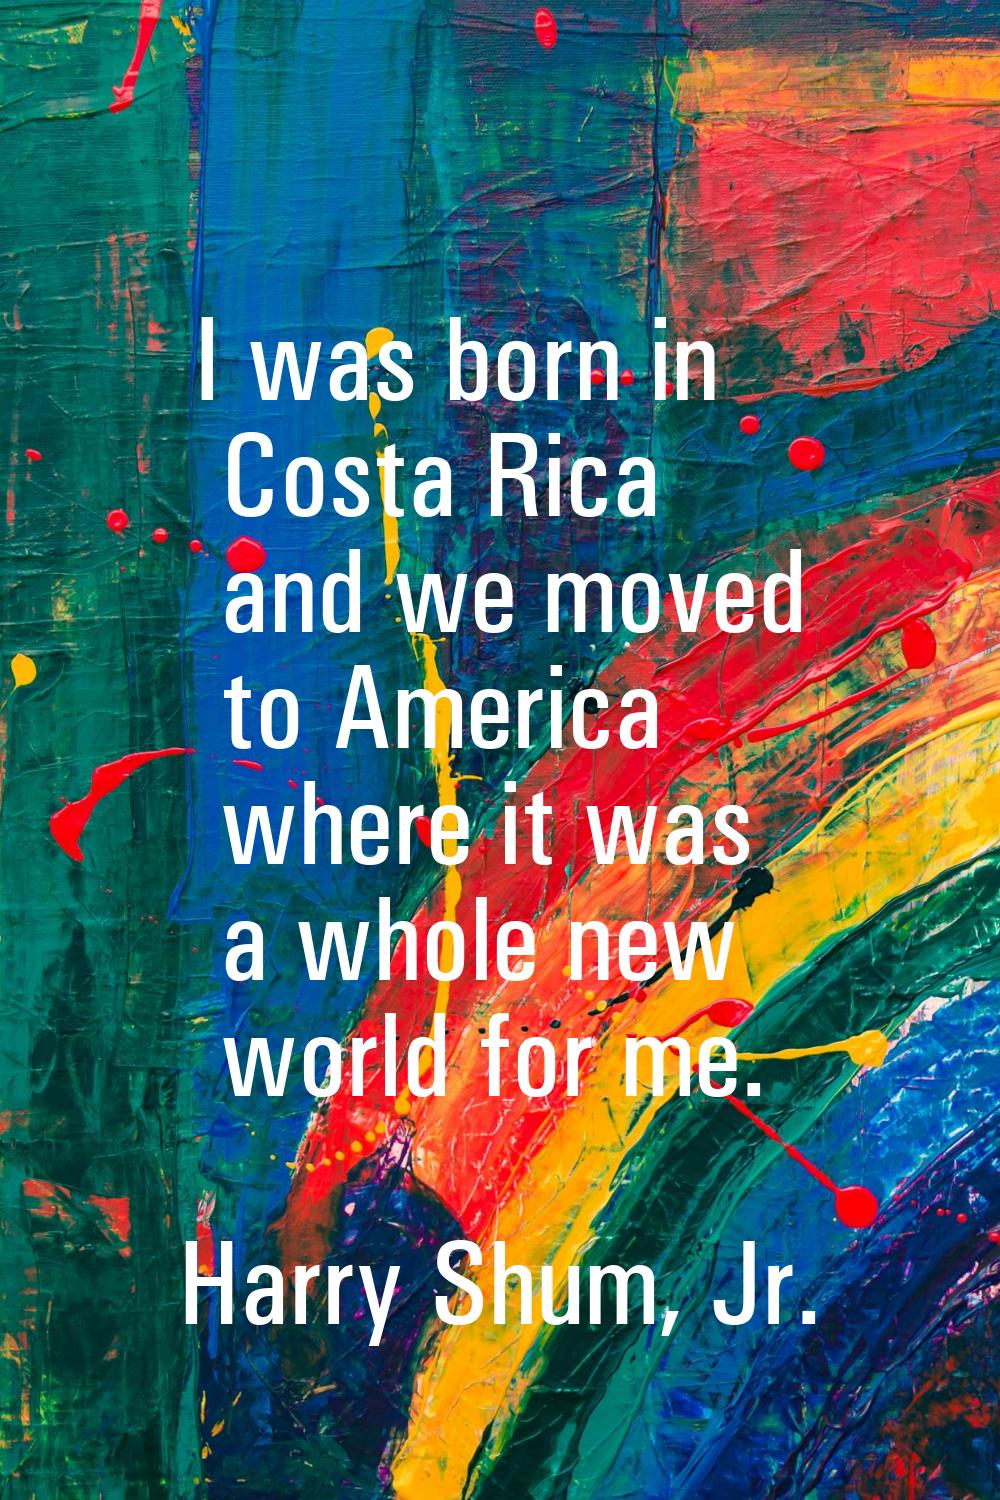 I was born in Costa Rica and we moved to America where it was a whole new world for me.